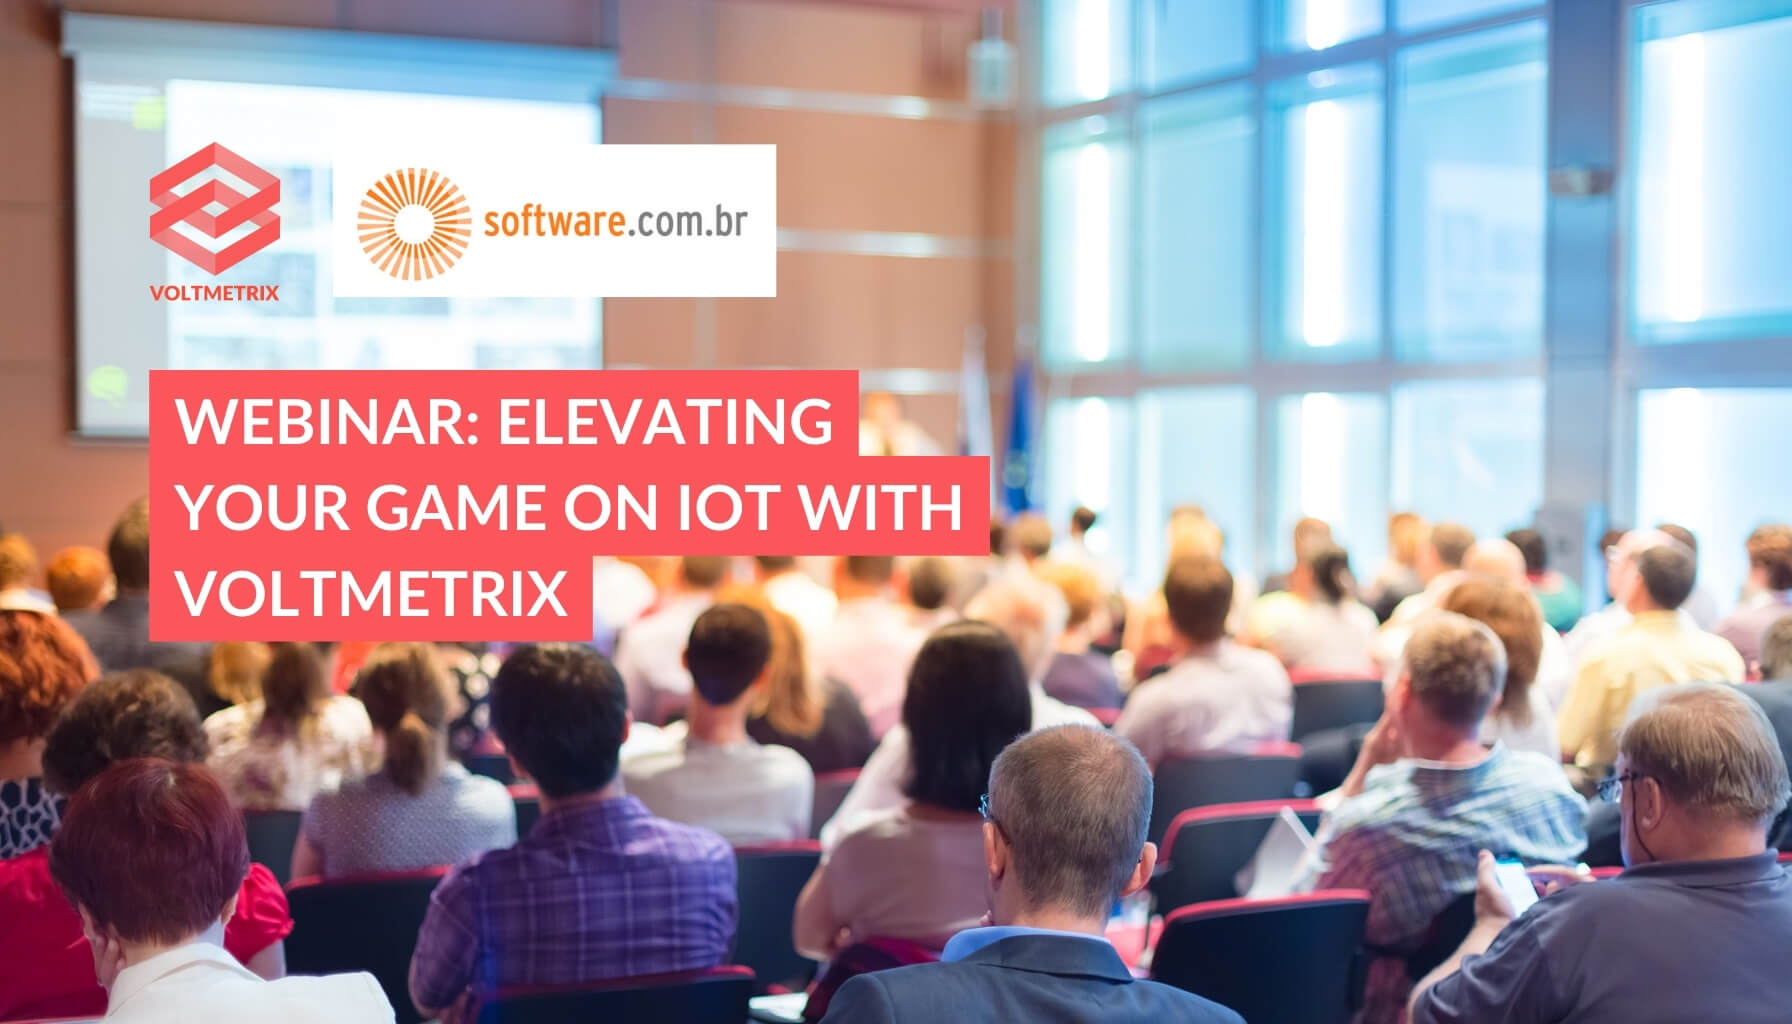 Elevating IoT Potential with Voltmetrix and Software.com.br